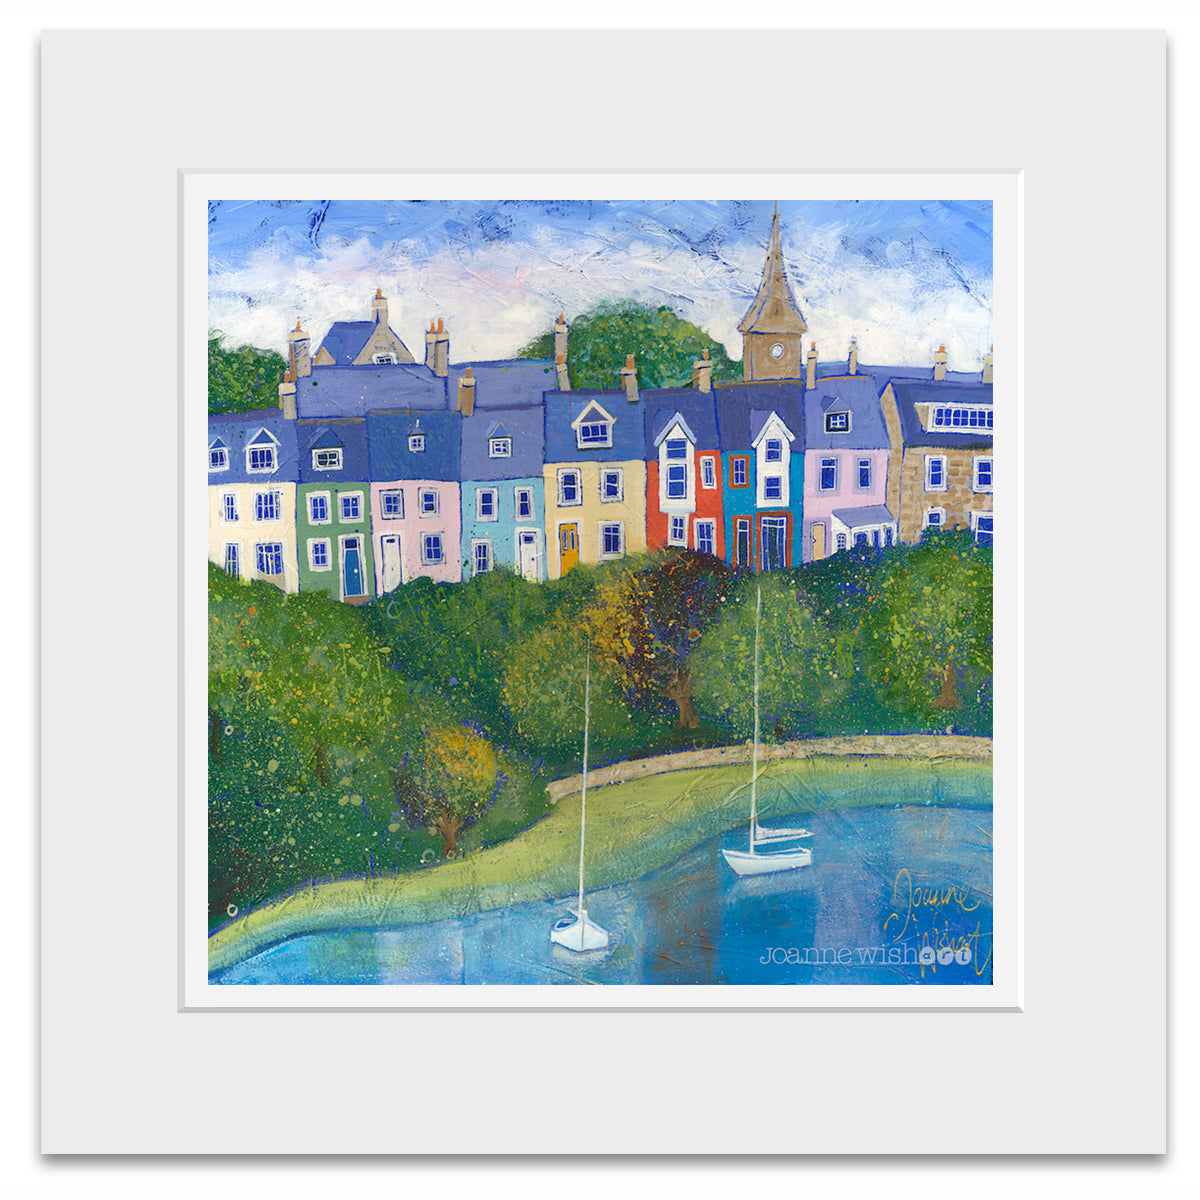 A mounted print of Lovaine terrace in Alnmouth Northumberland.